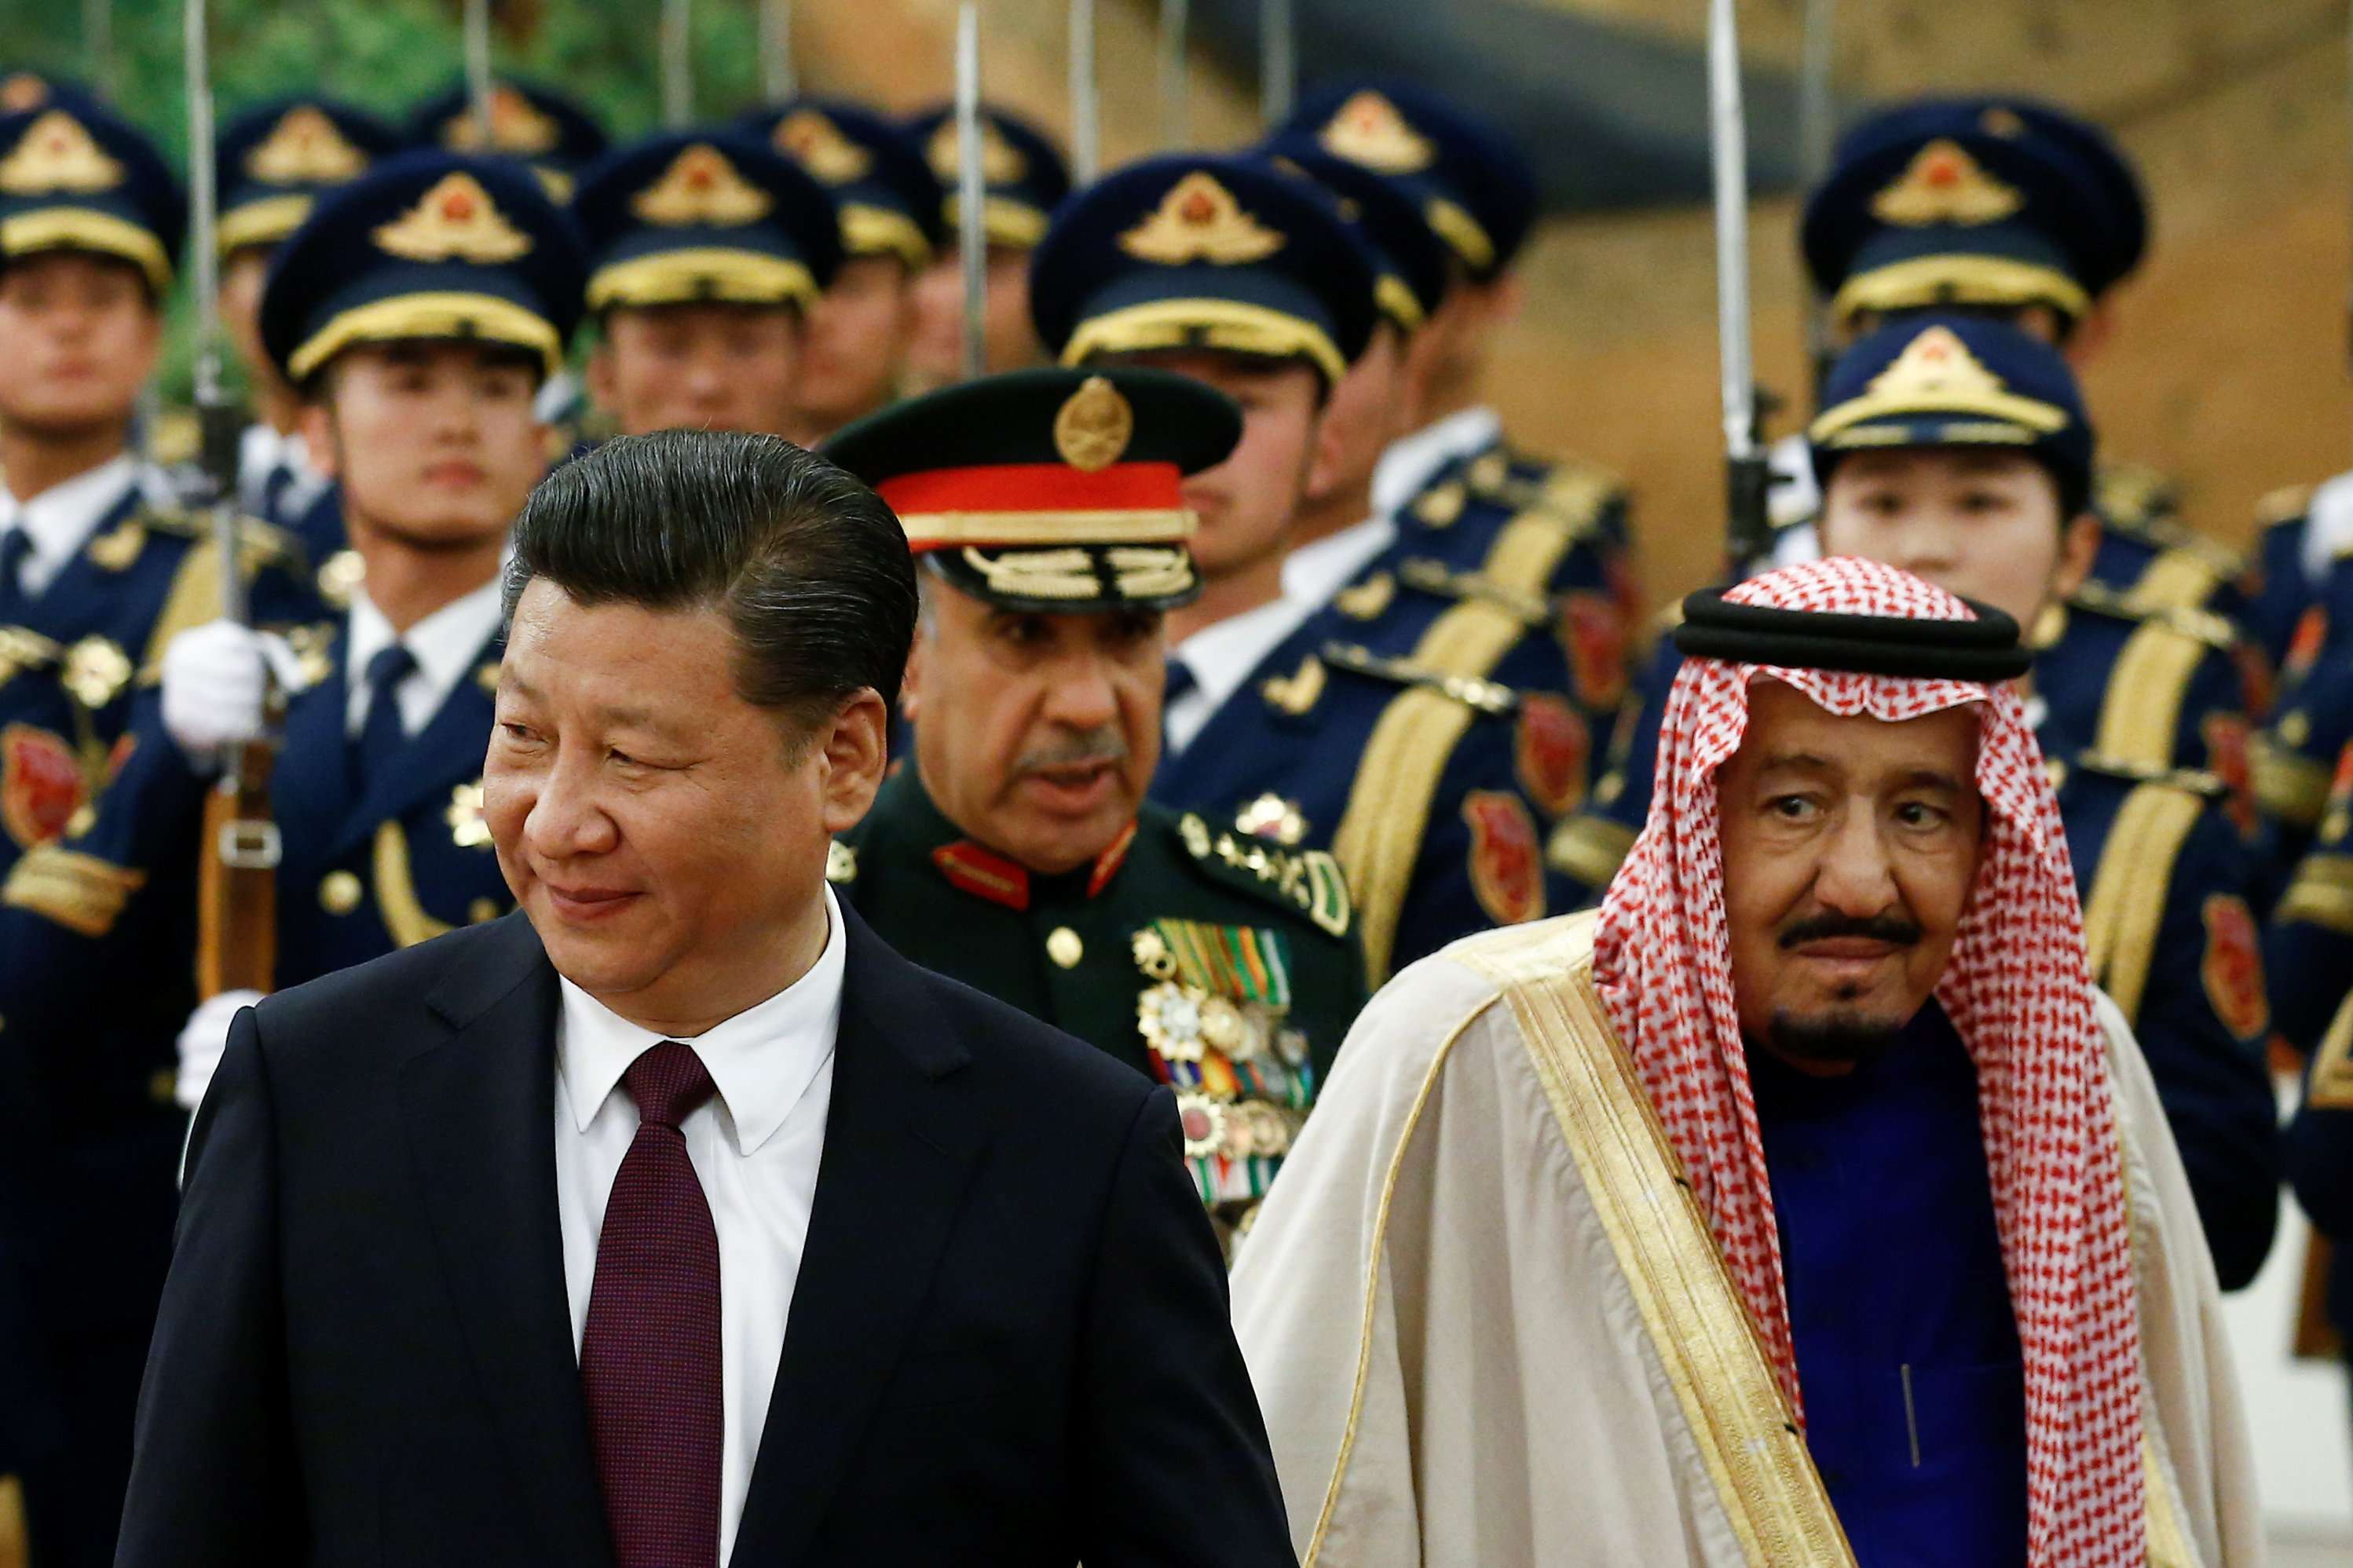 Saudi King Salman (right) pictured with President Xi Jinping at a welcome ceremony at the Great Hall of the People in Beijing earlier this month. Photo: Reuters